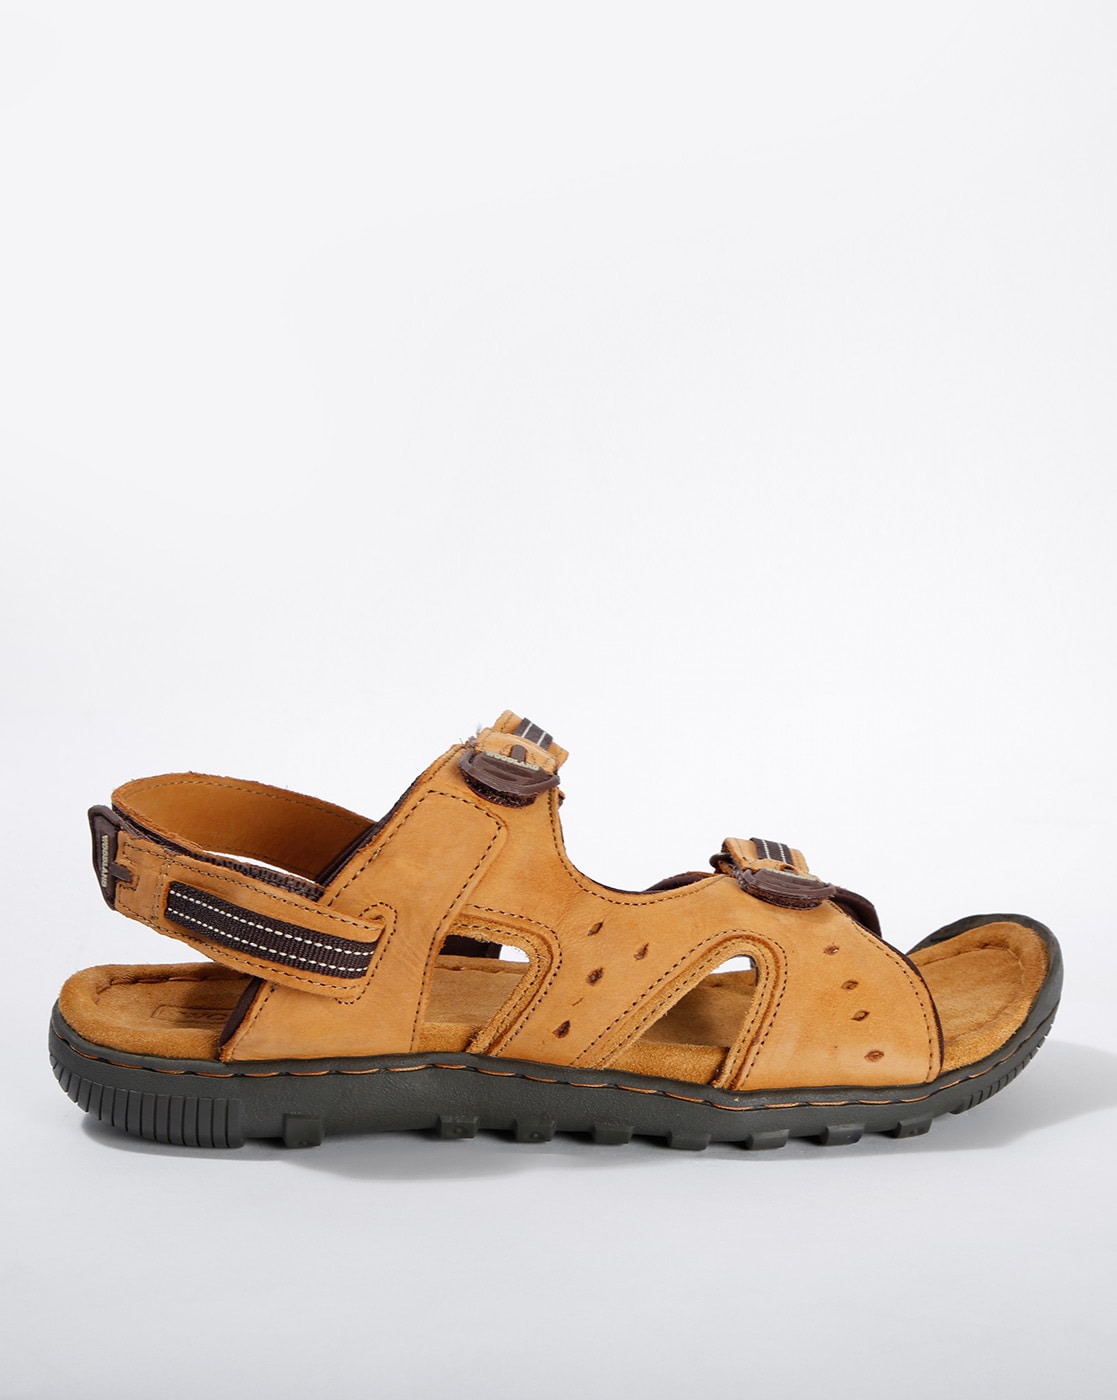 Woodland Men's Camel Leather Sandals and Floaters - 7 UK/India (41 EU)  Price in India, Specs, Reviews, Offers, Coupons | Topprice.in